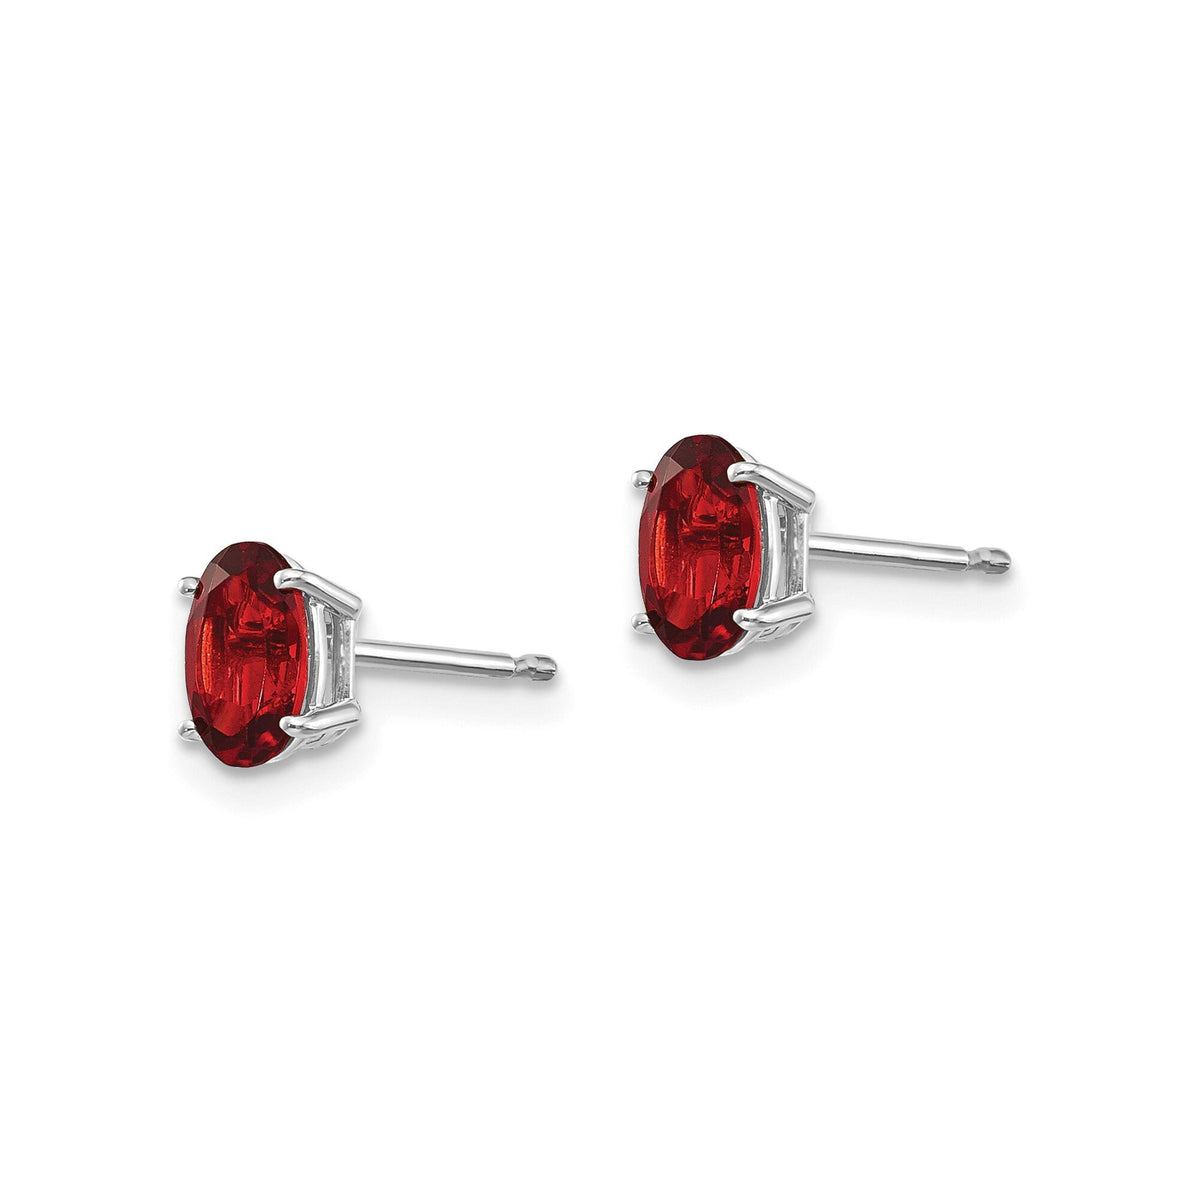 14k Yellow Gold or 14k White Gold 6x4mm Garnet Earrings January Birthstone Studs- Gift Box Included - Ships Next Business Day